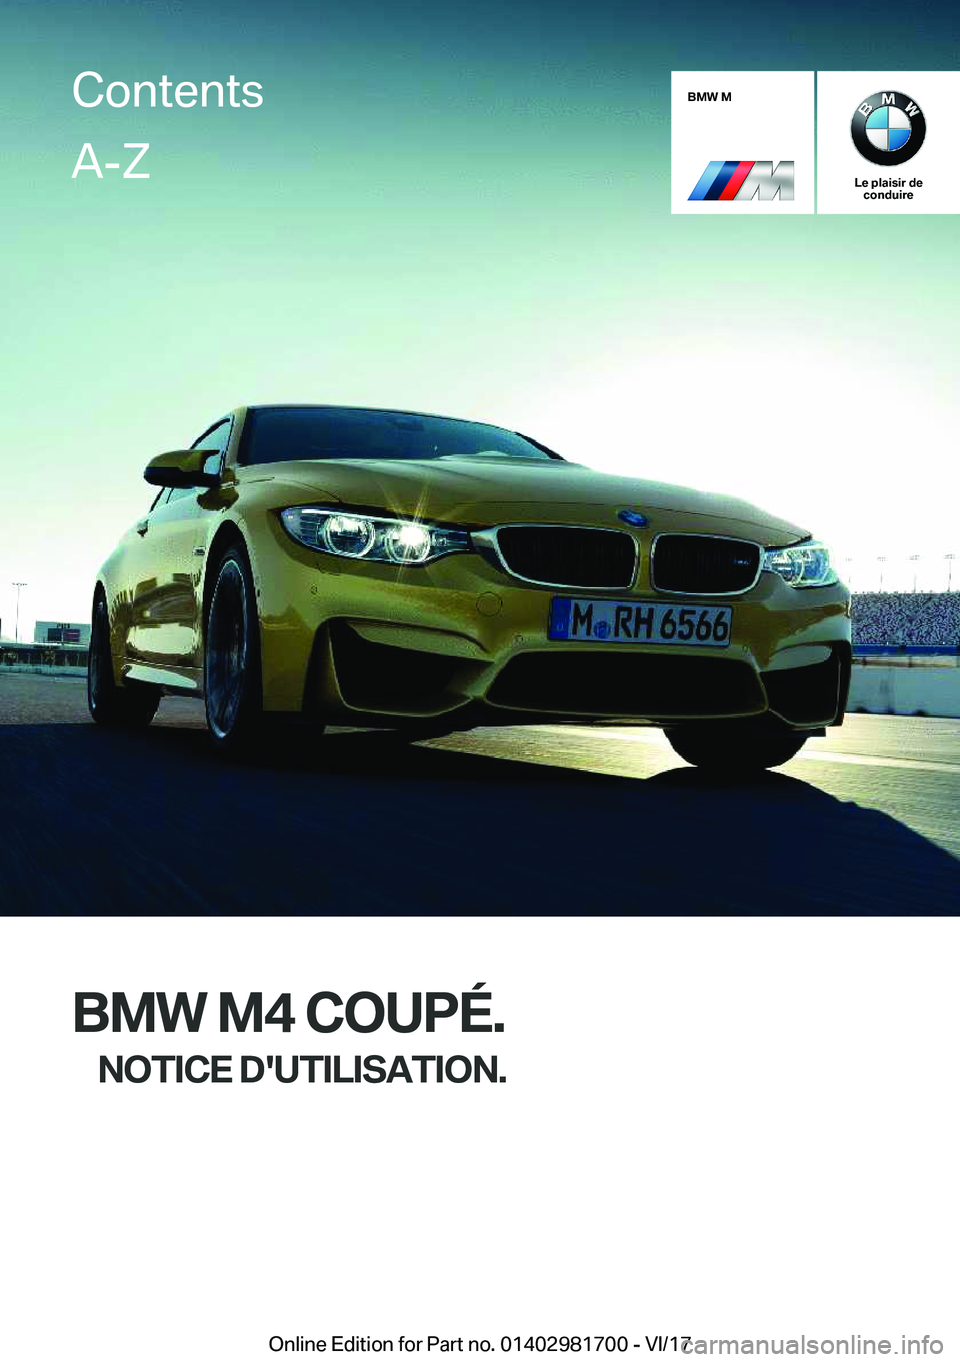 BMW M4 2018  Notices Demploi (in French) �B�M�W��M
�L�e��p�l�a�i�s�i�r��d�e�c�o�n�d�u�i�r�e
�B�M�W��M�4��C�O�U�P�